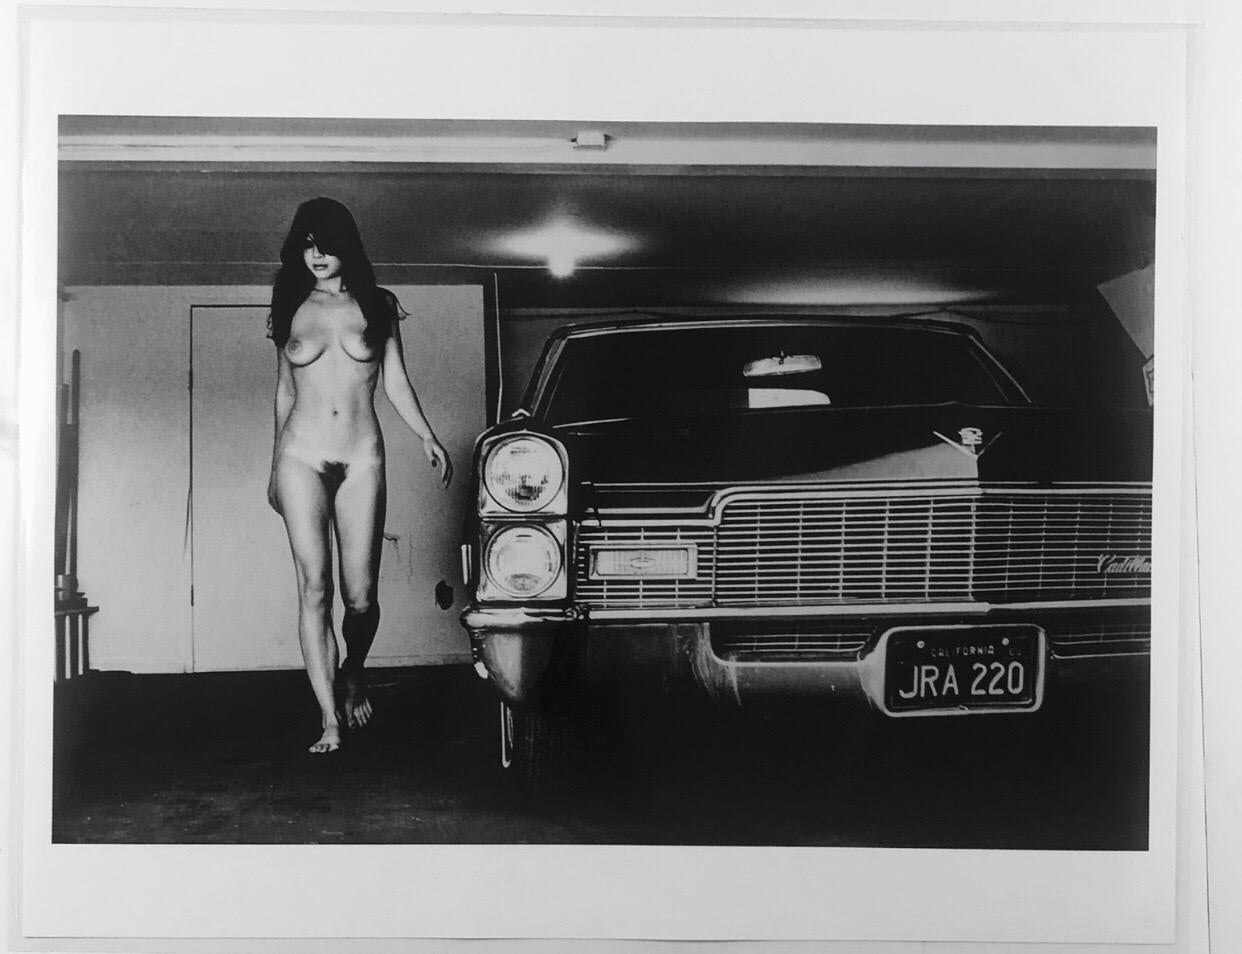 In ‘Hollywood 1976 Cadillac in Garage’, Newton plays on the idea of parking multiple cars in your garage. Channelling the twin boyhood desires of girls and cars, there is a sense of seduction and danger to both as they come towards you. Newton was